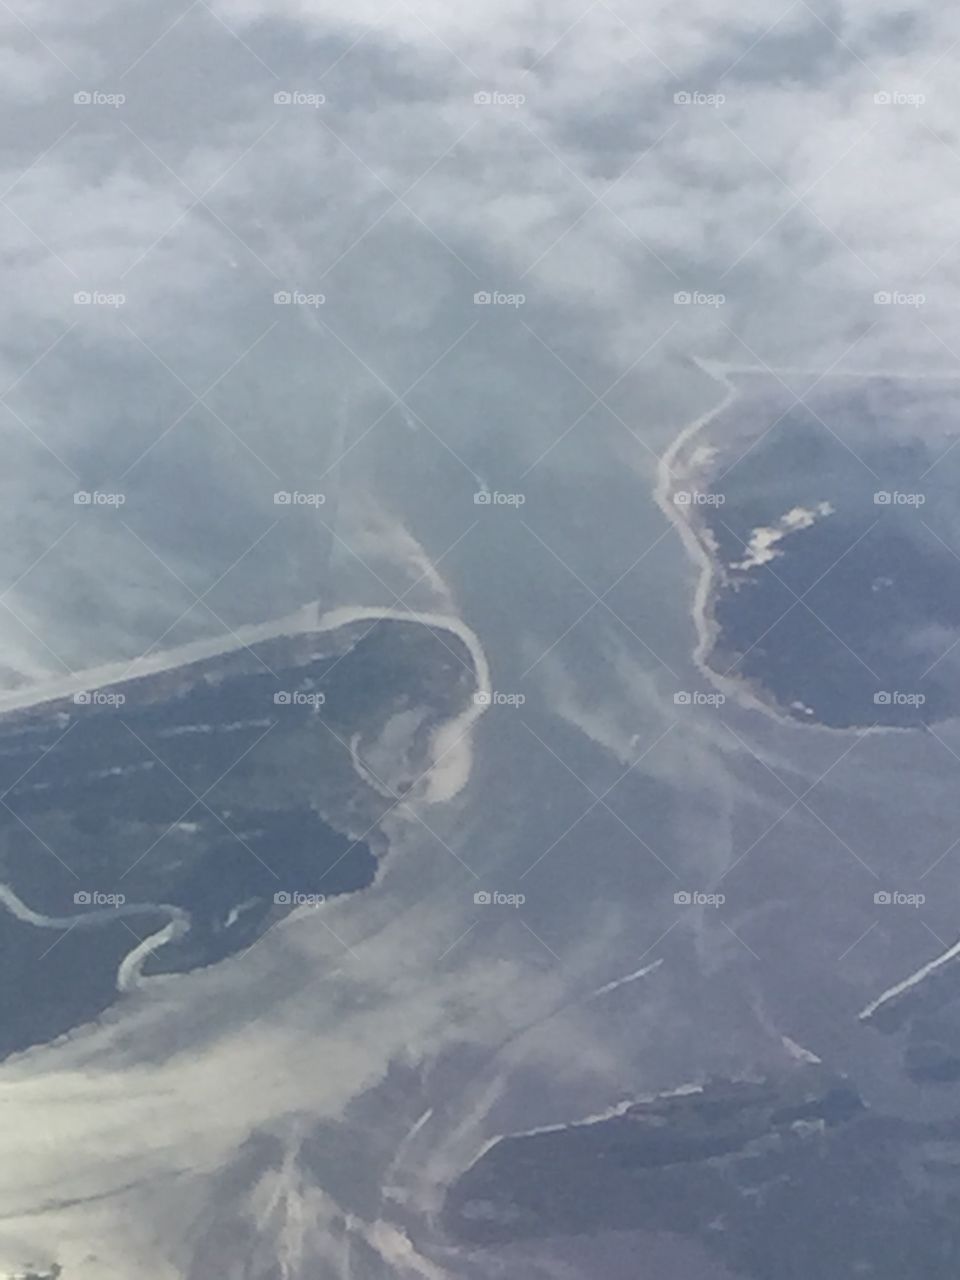 Florida's east coast . From the plane 